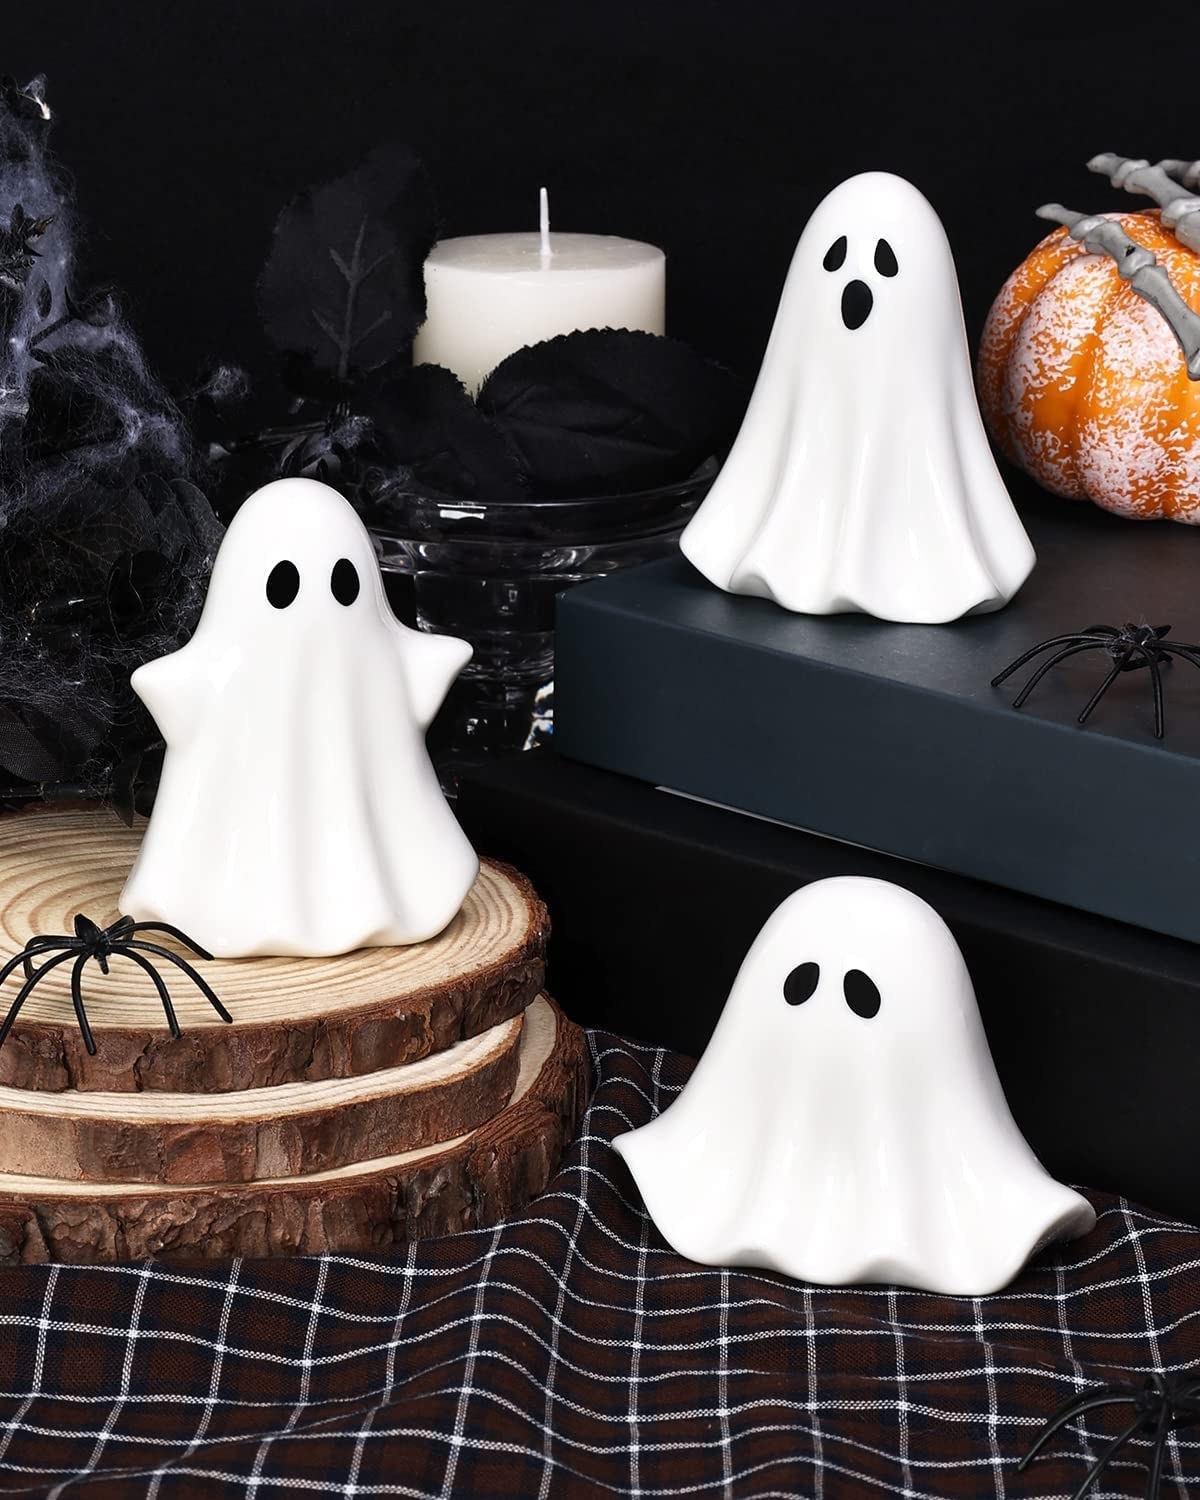 the ceramic ghosts on a table